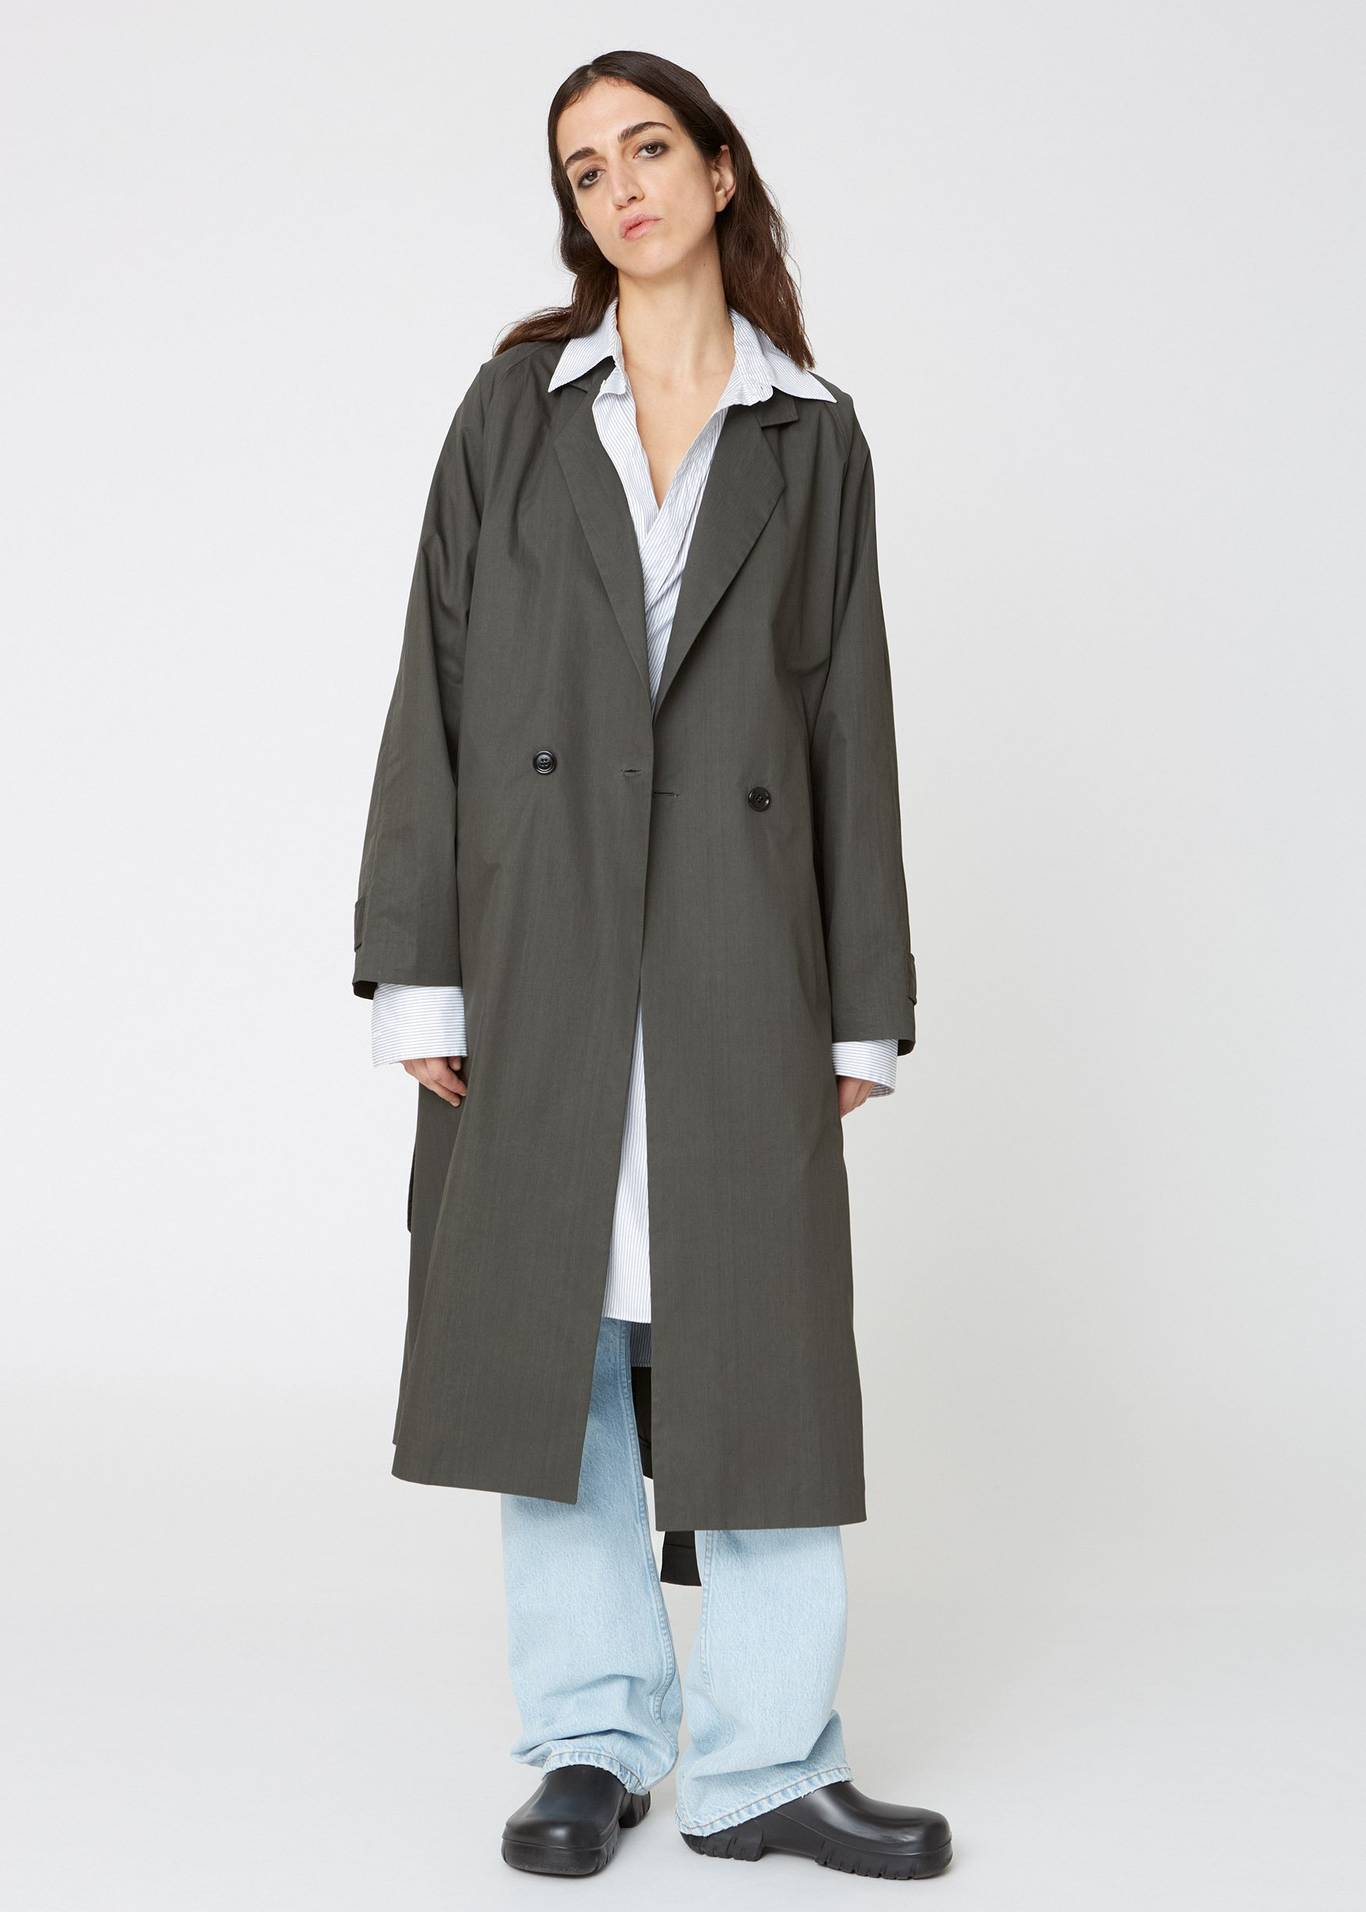 Canvas coat in pirate black by Hope